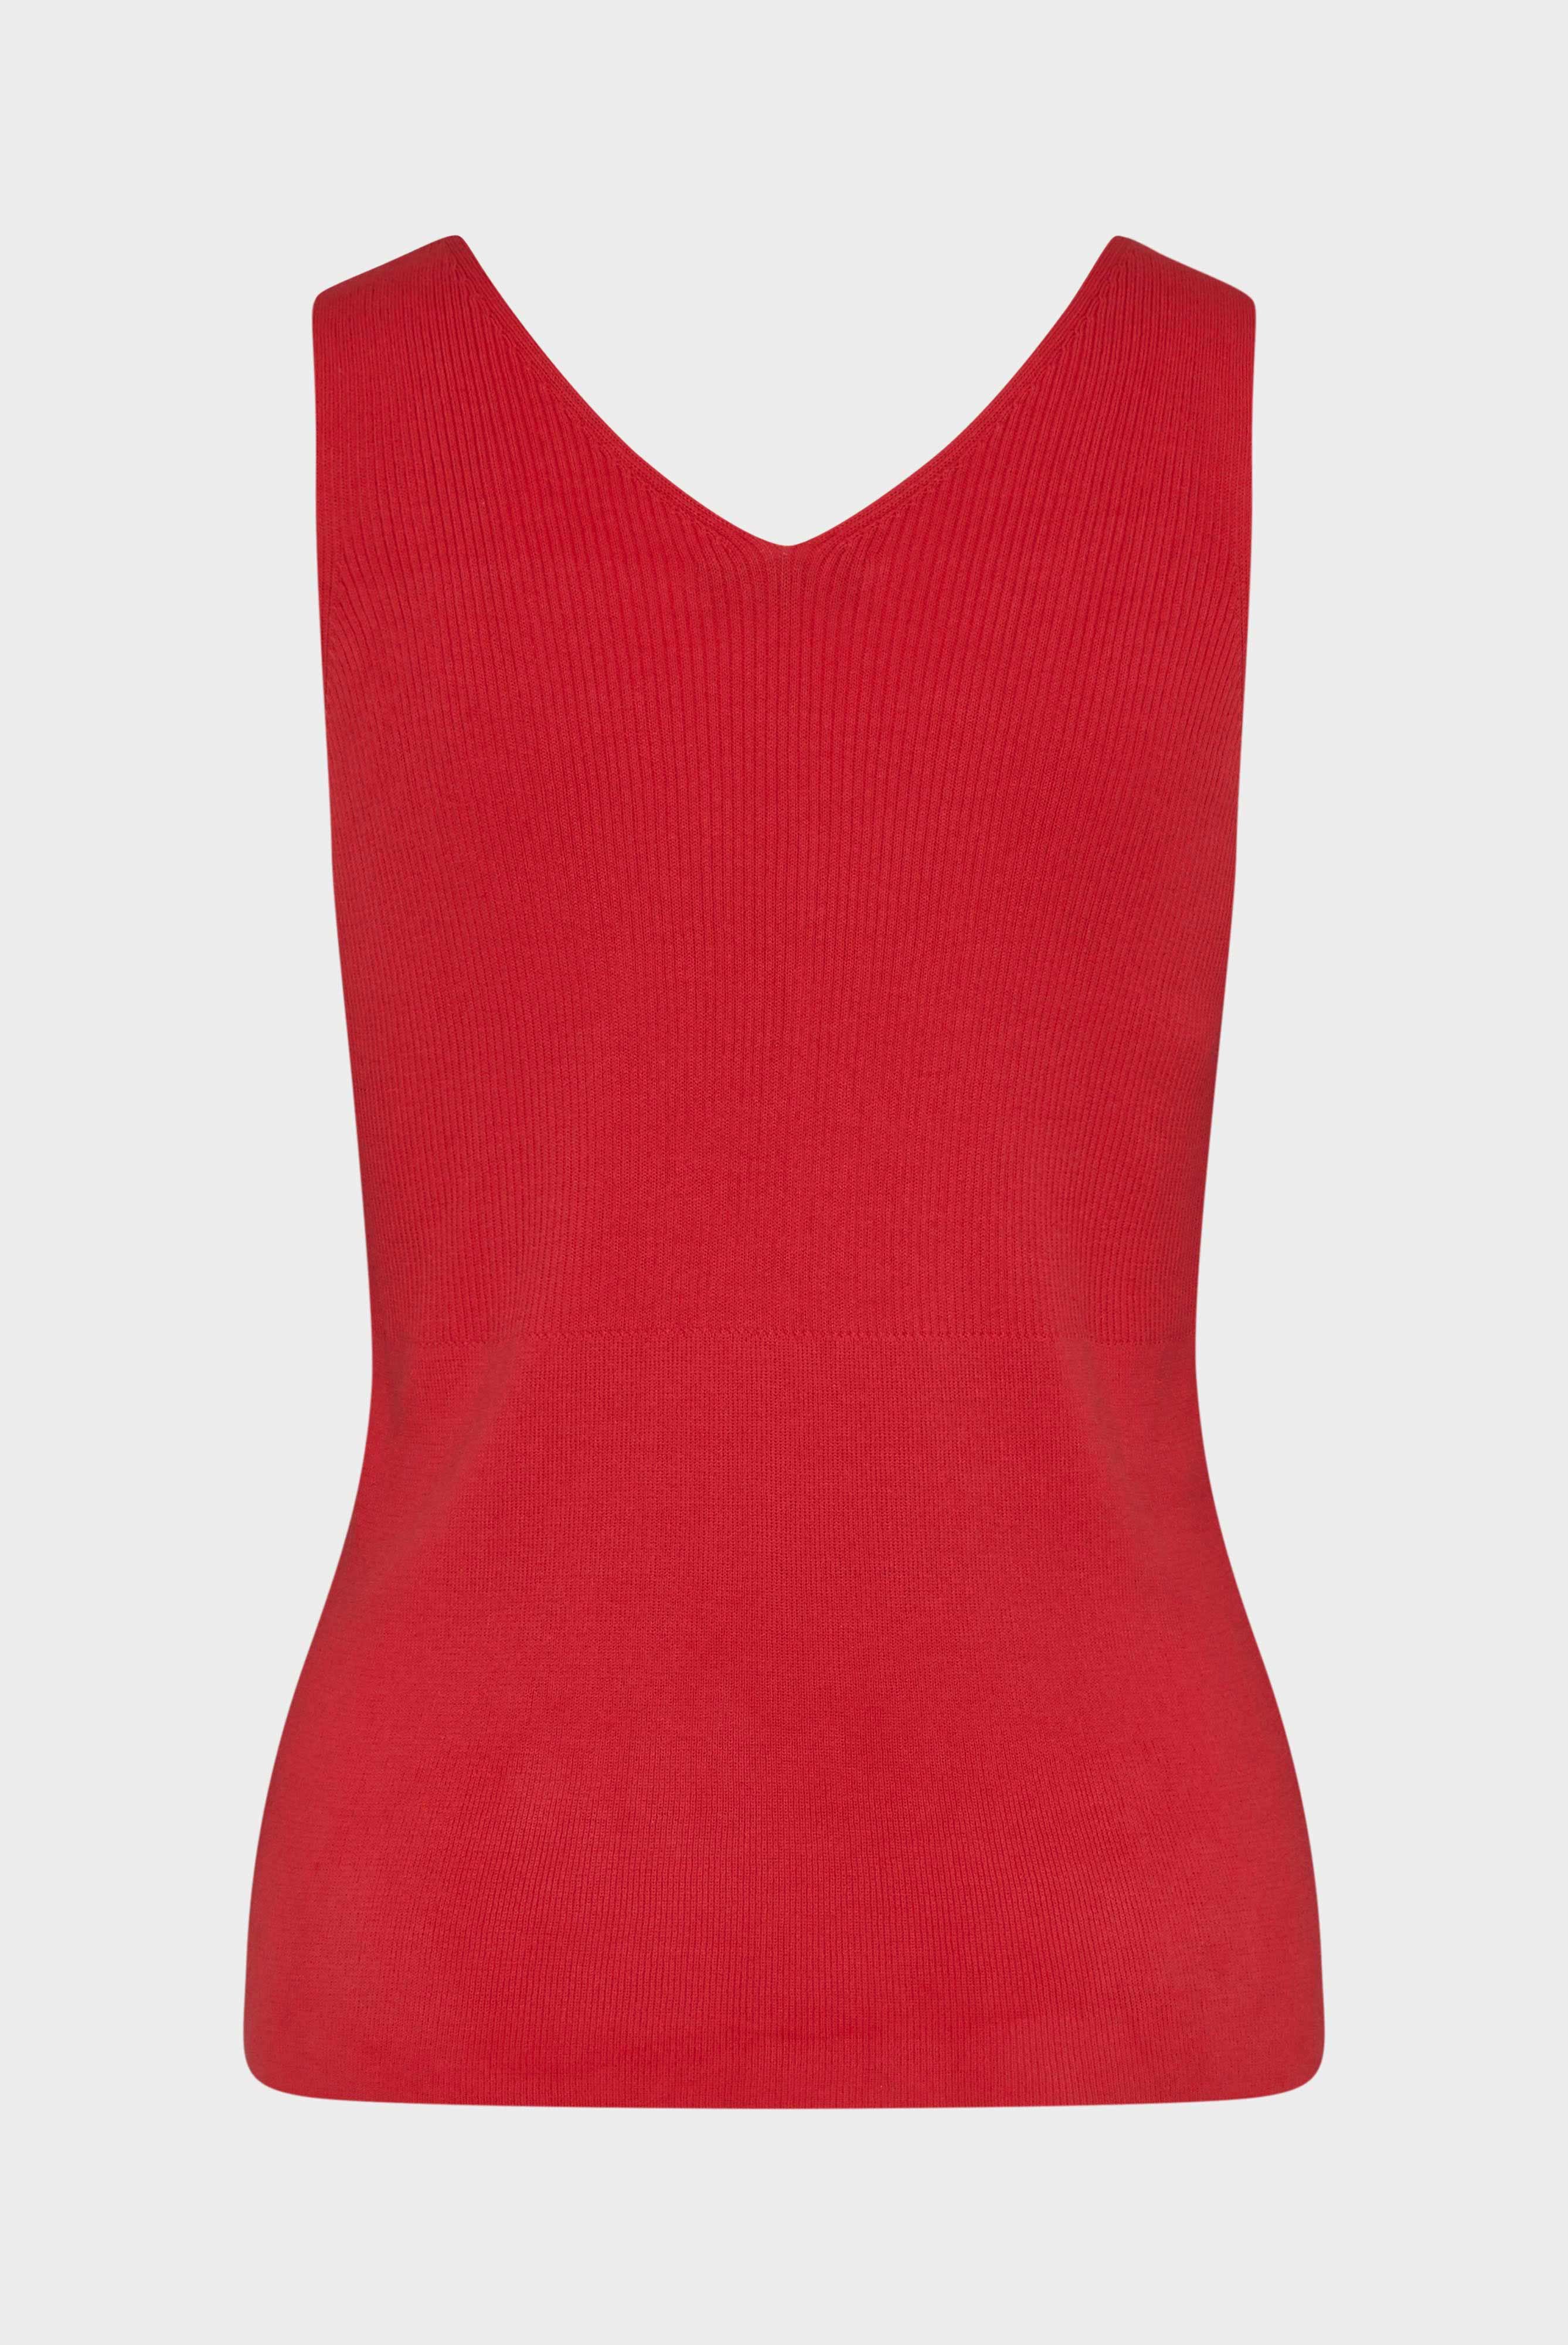 Tops & T-Shirts+Slim fit cotton tank top rot/rose+09.9966..S00192.540.XS